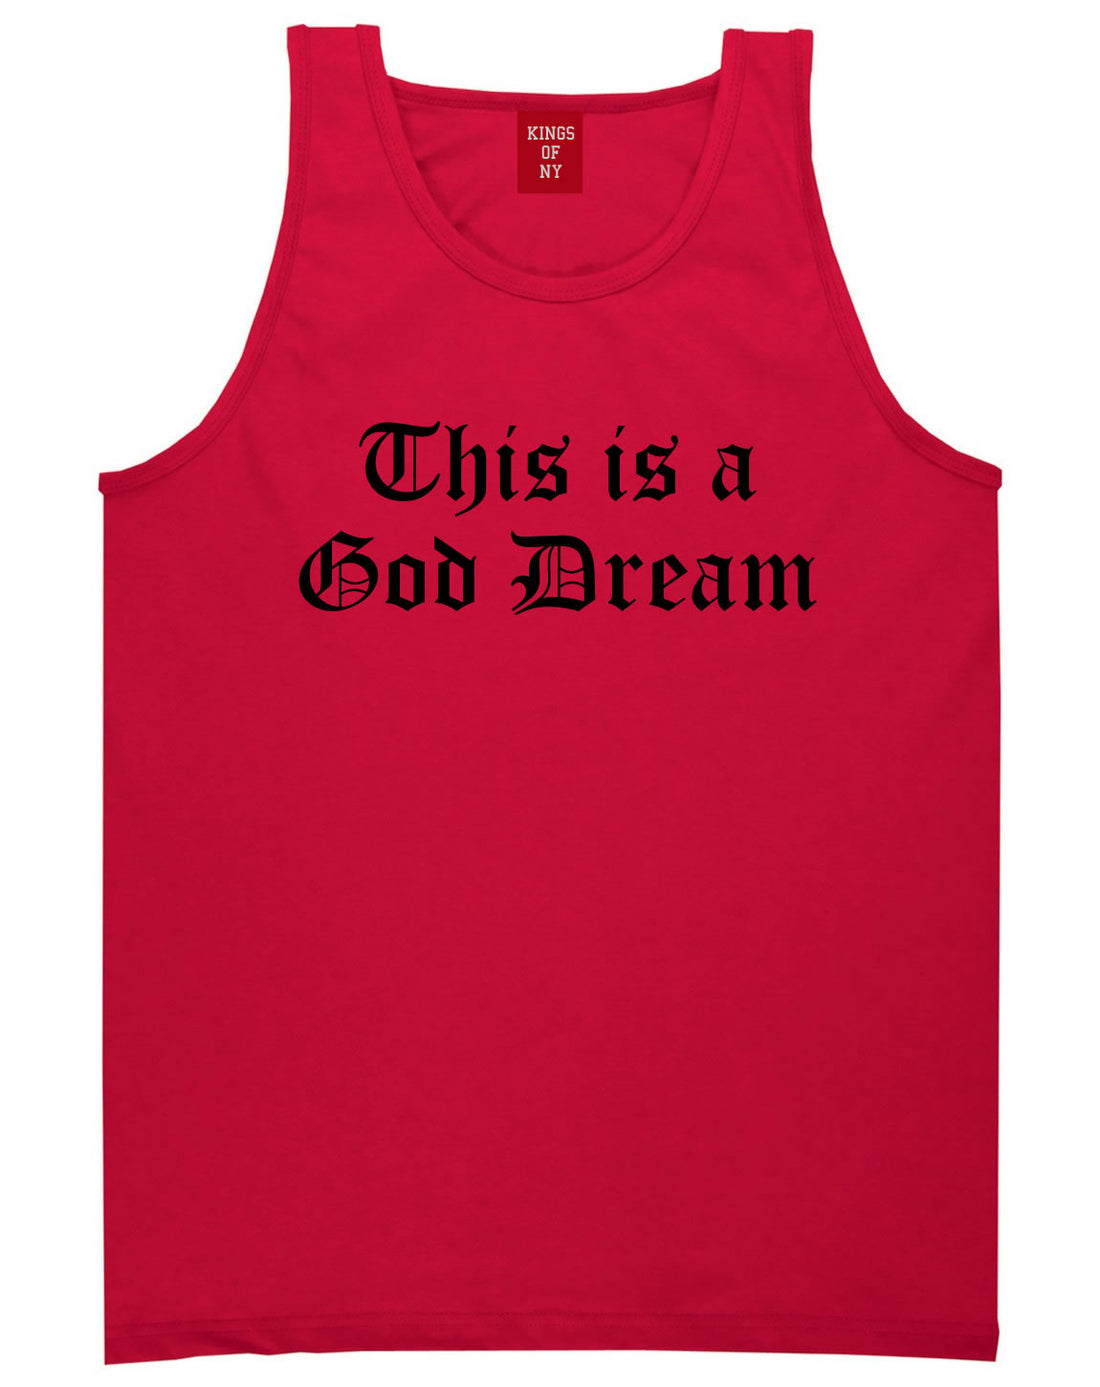 This Is A God Dream Gothic Old English Tank Top in Red By Kings Of NY